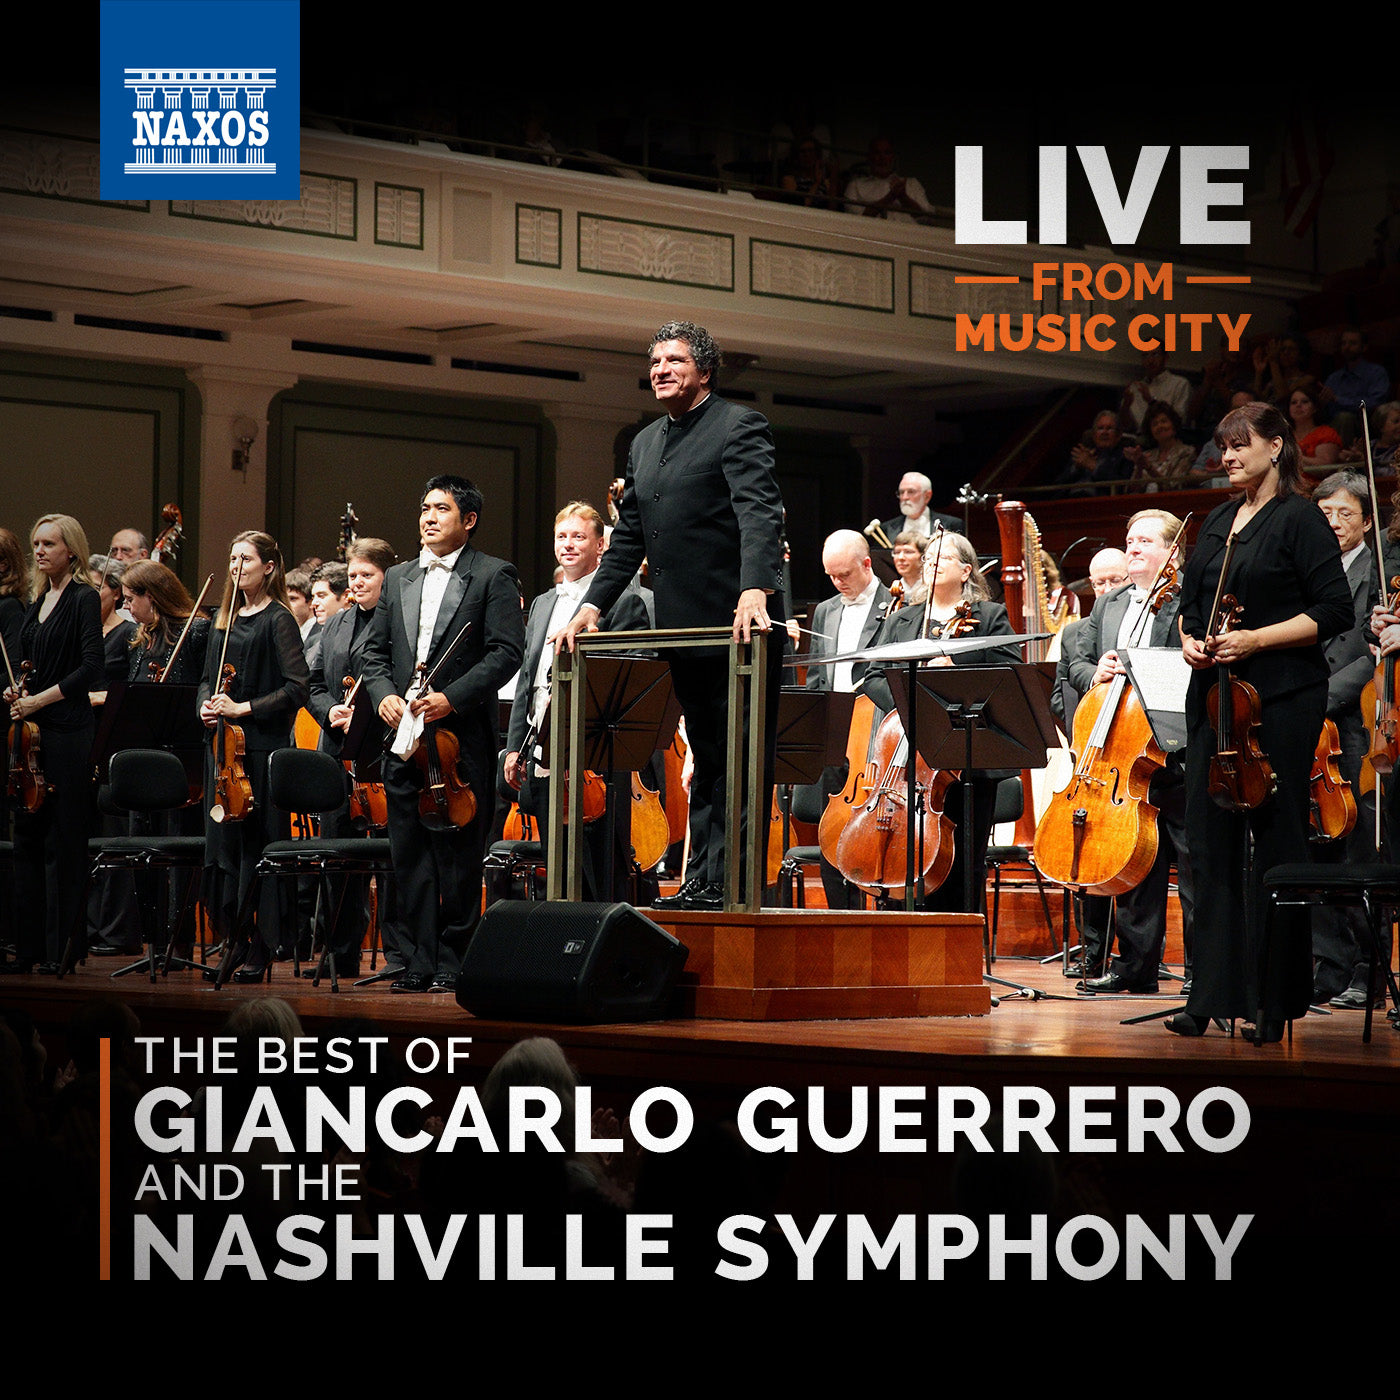 The Best of Giancarlo Guerrero & the Nashville Symphony